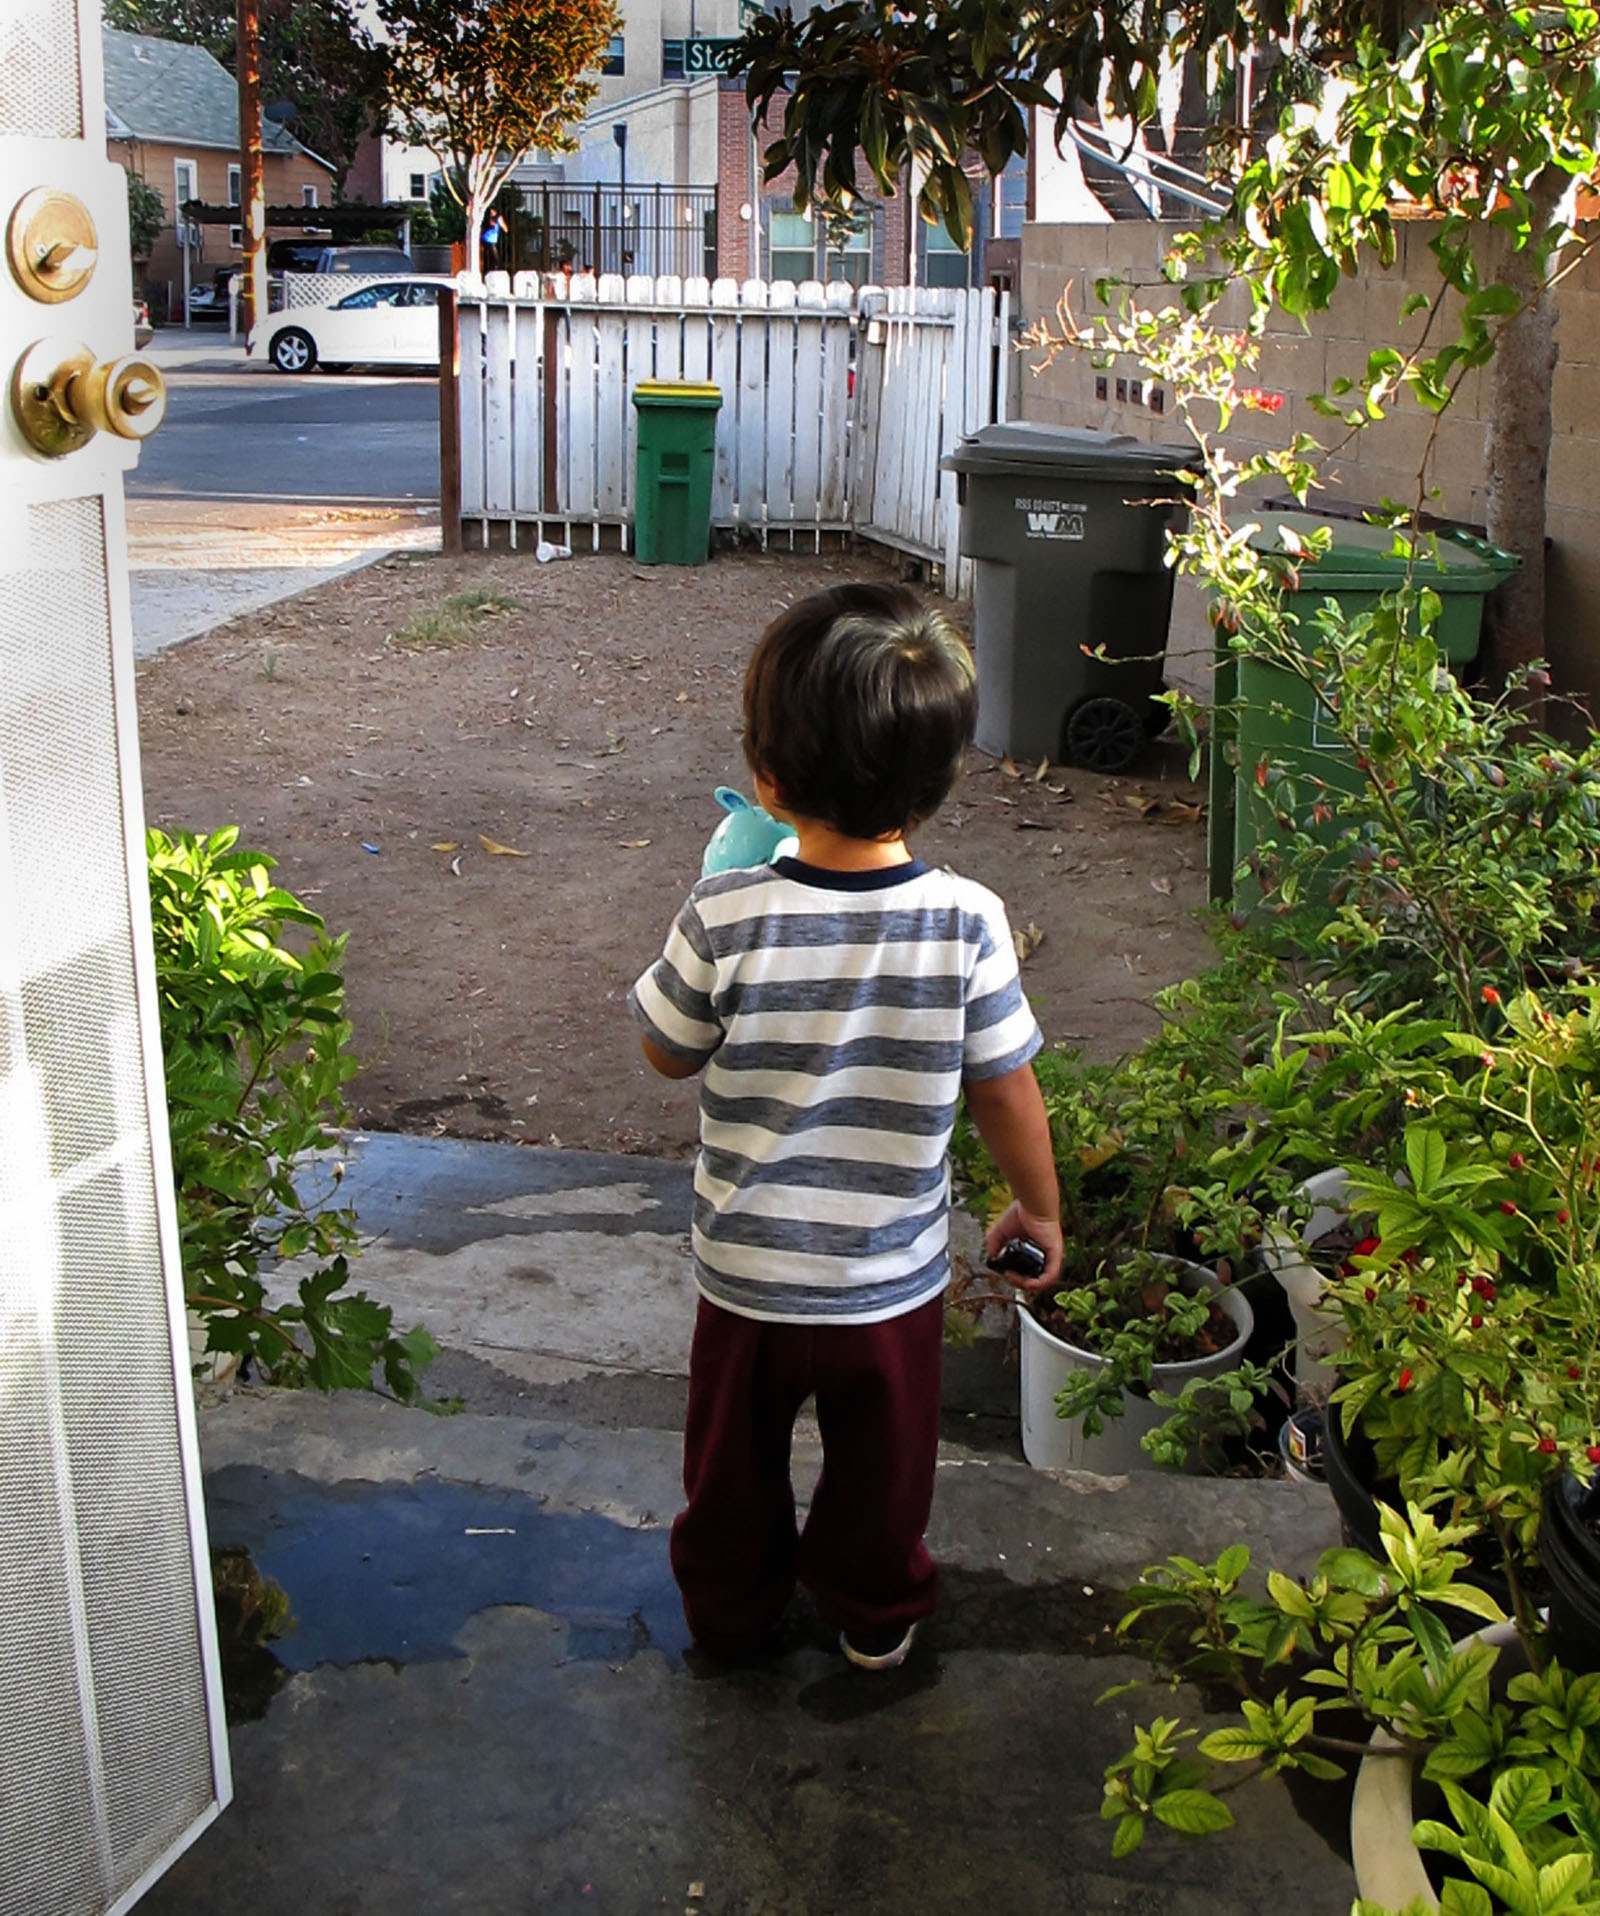 A young boy gazes at a front yard he rarely plays in due to lead soil contamination